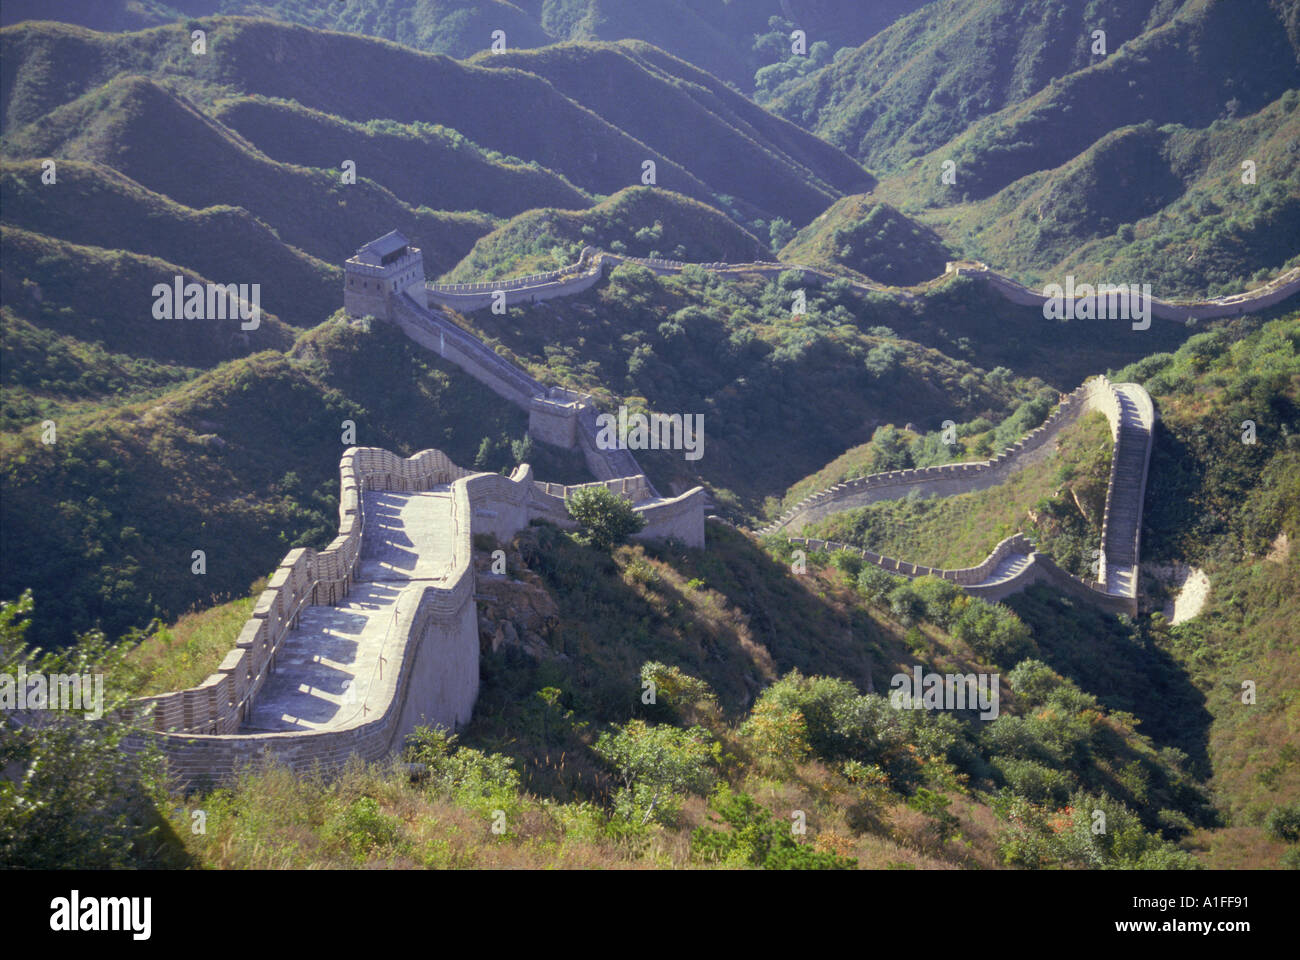 The Great Wall snaking through the hills of China G Hellier Stock Photo